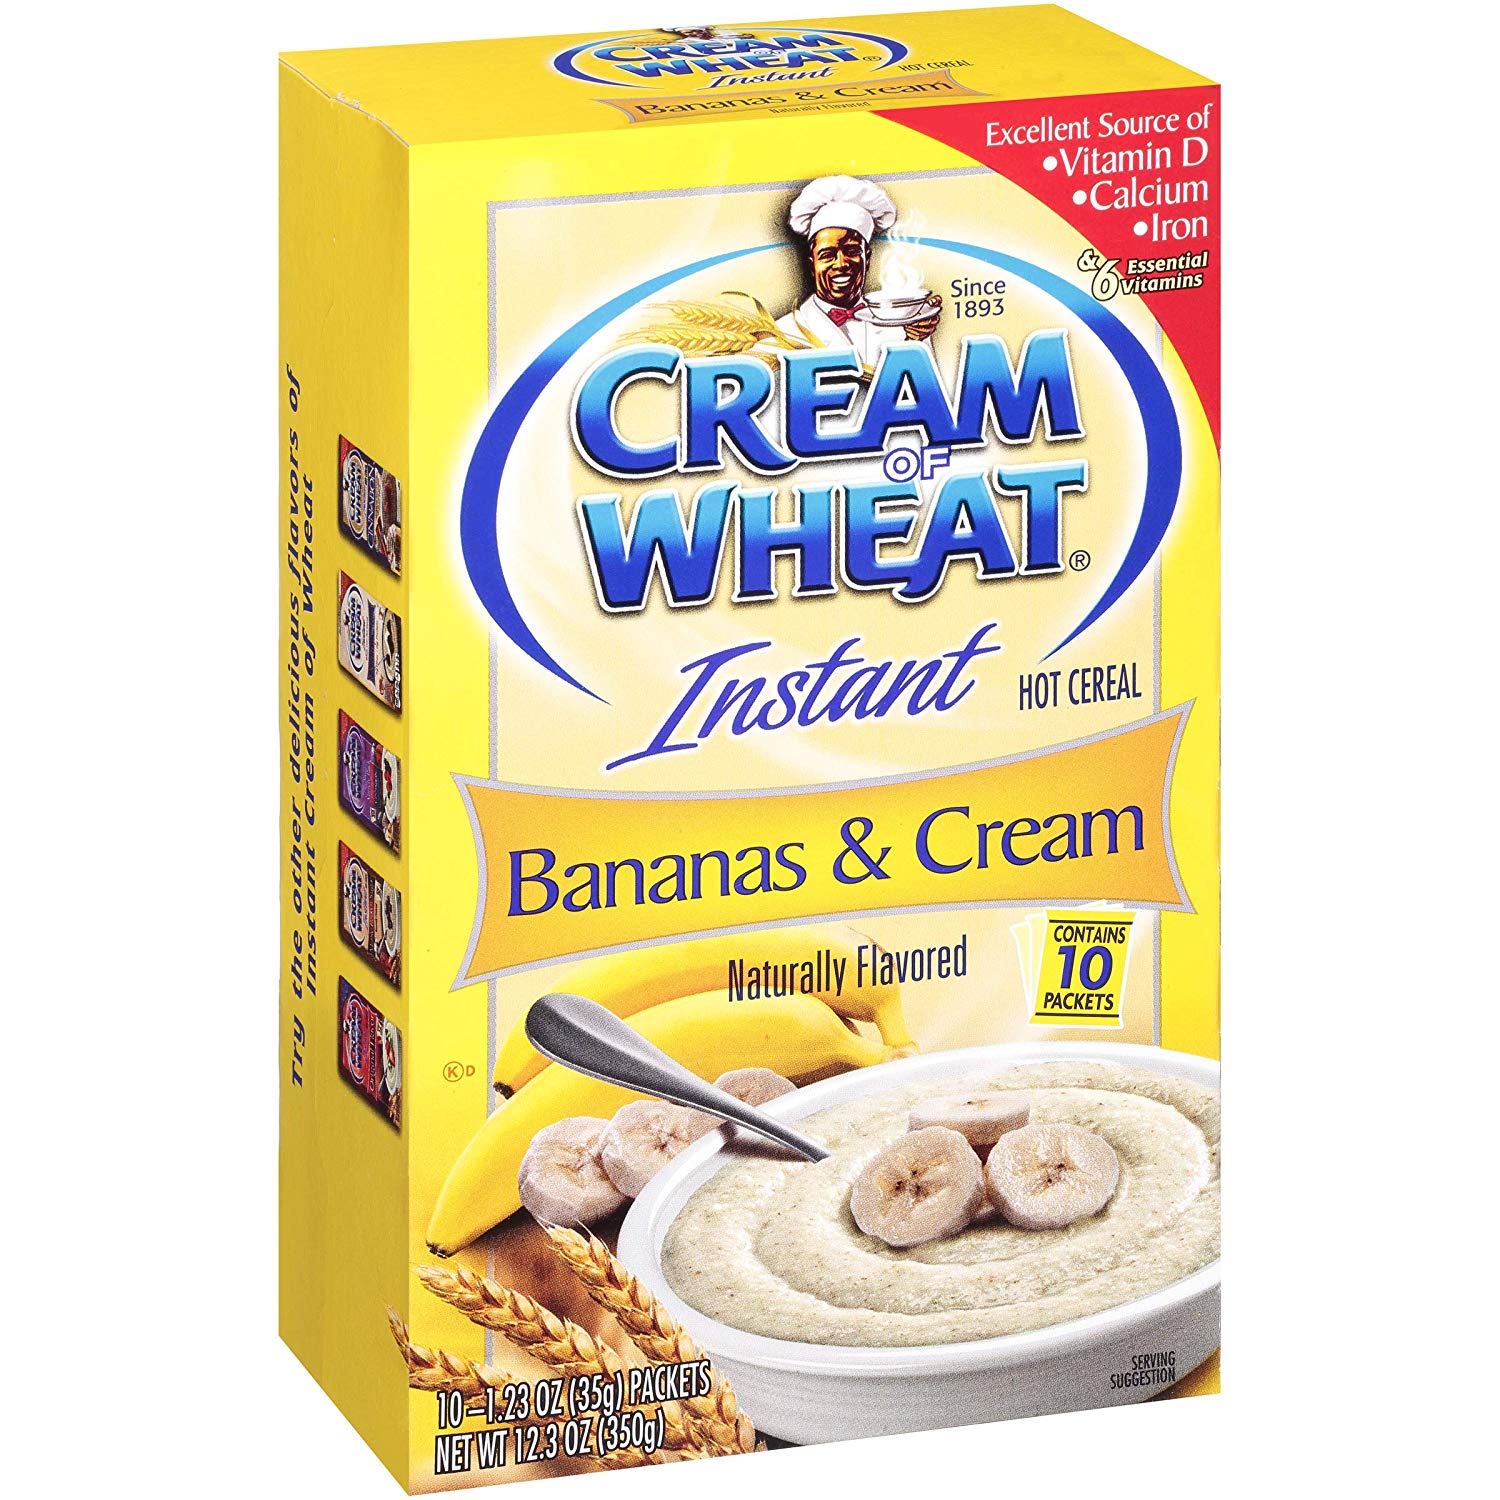 Cream of Wheat, Instant Hot Cereal, Variety Pack, Box of 10 Packets